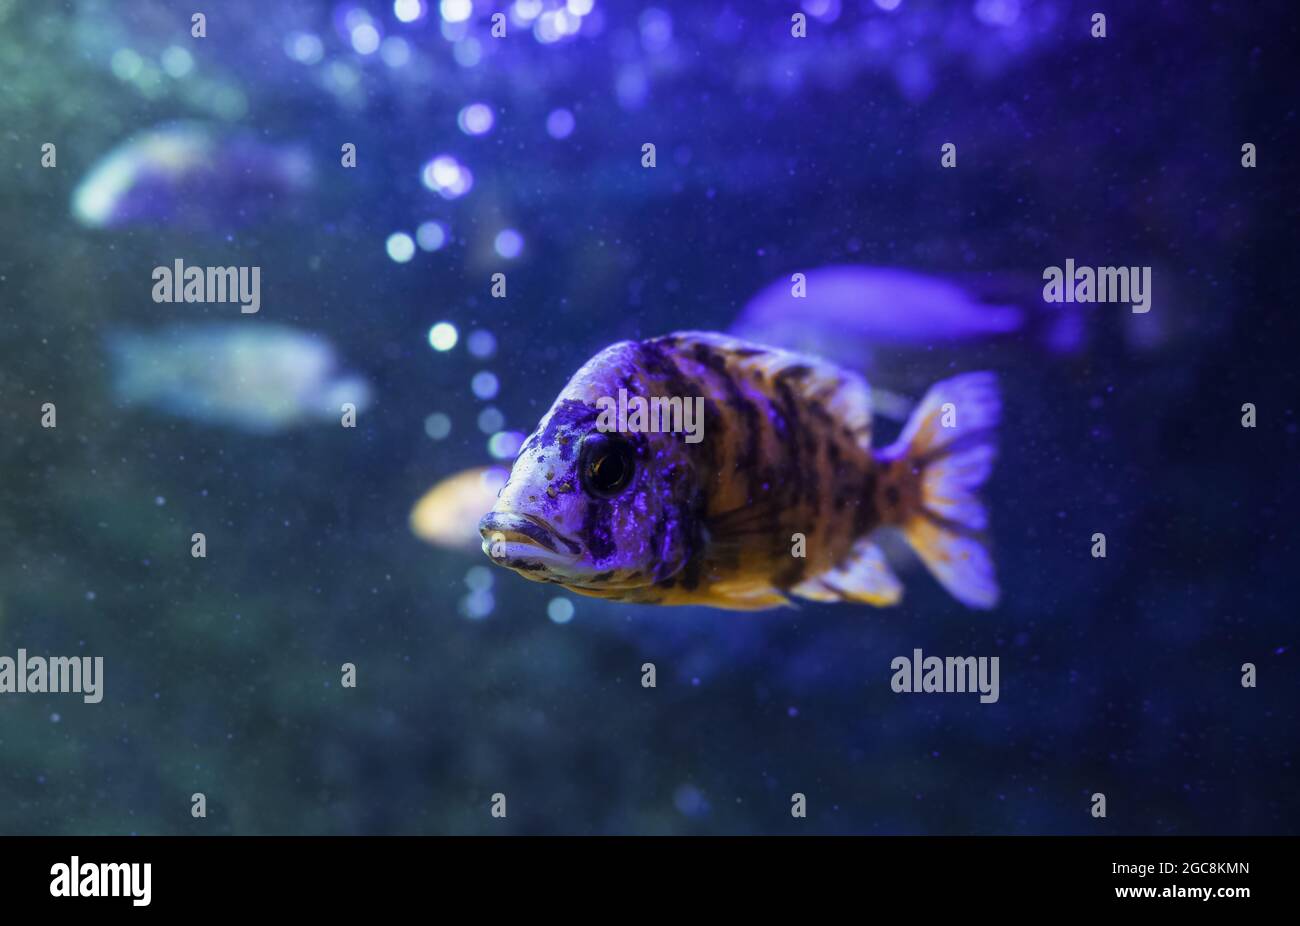 close view of peacpck cichlid head with blurred water background Stock Photo